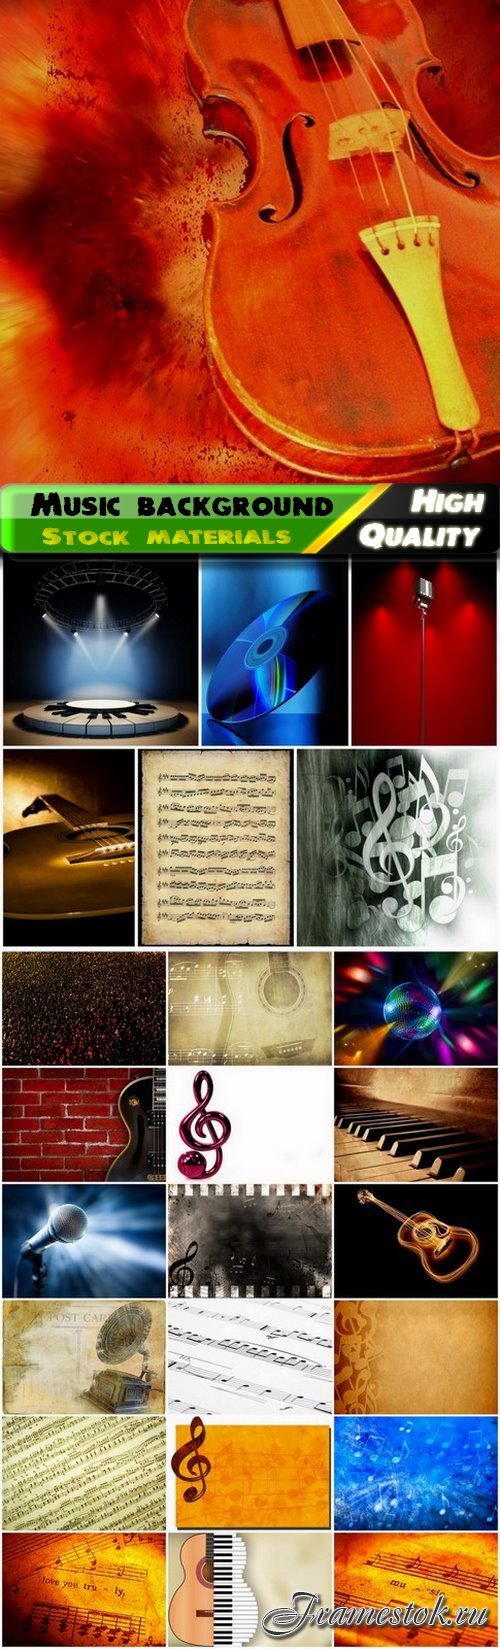 Music background with notes and musical instrument - 25 HQ Jpg